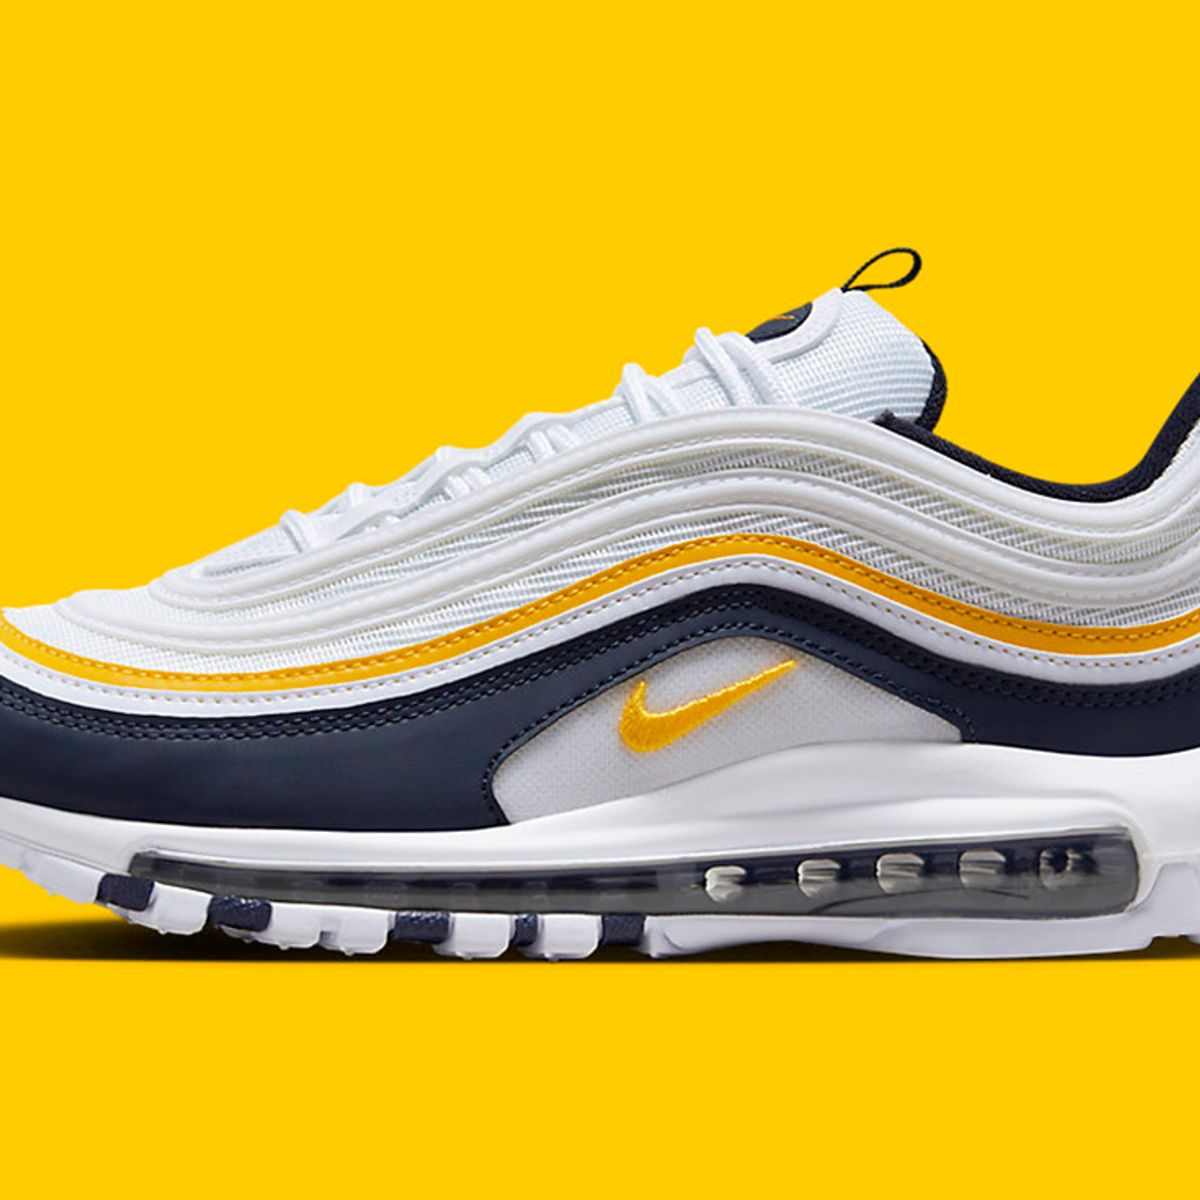 Hail to the Victors! The Nike Max 97 Gets 'Michigan' Colourway - Sneaker Freaker